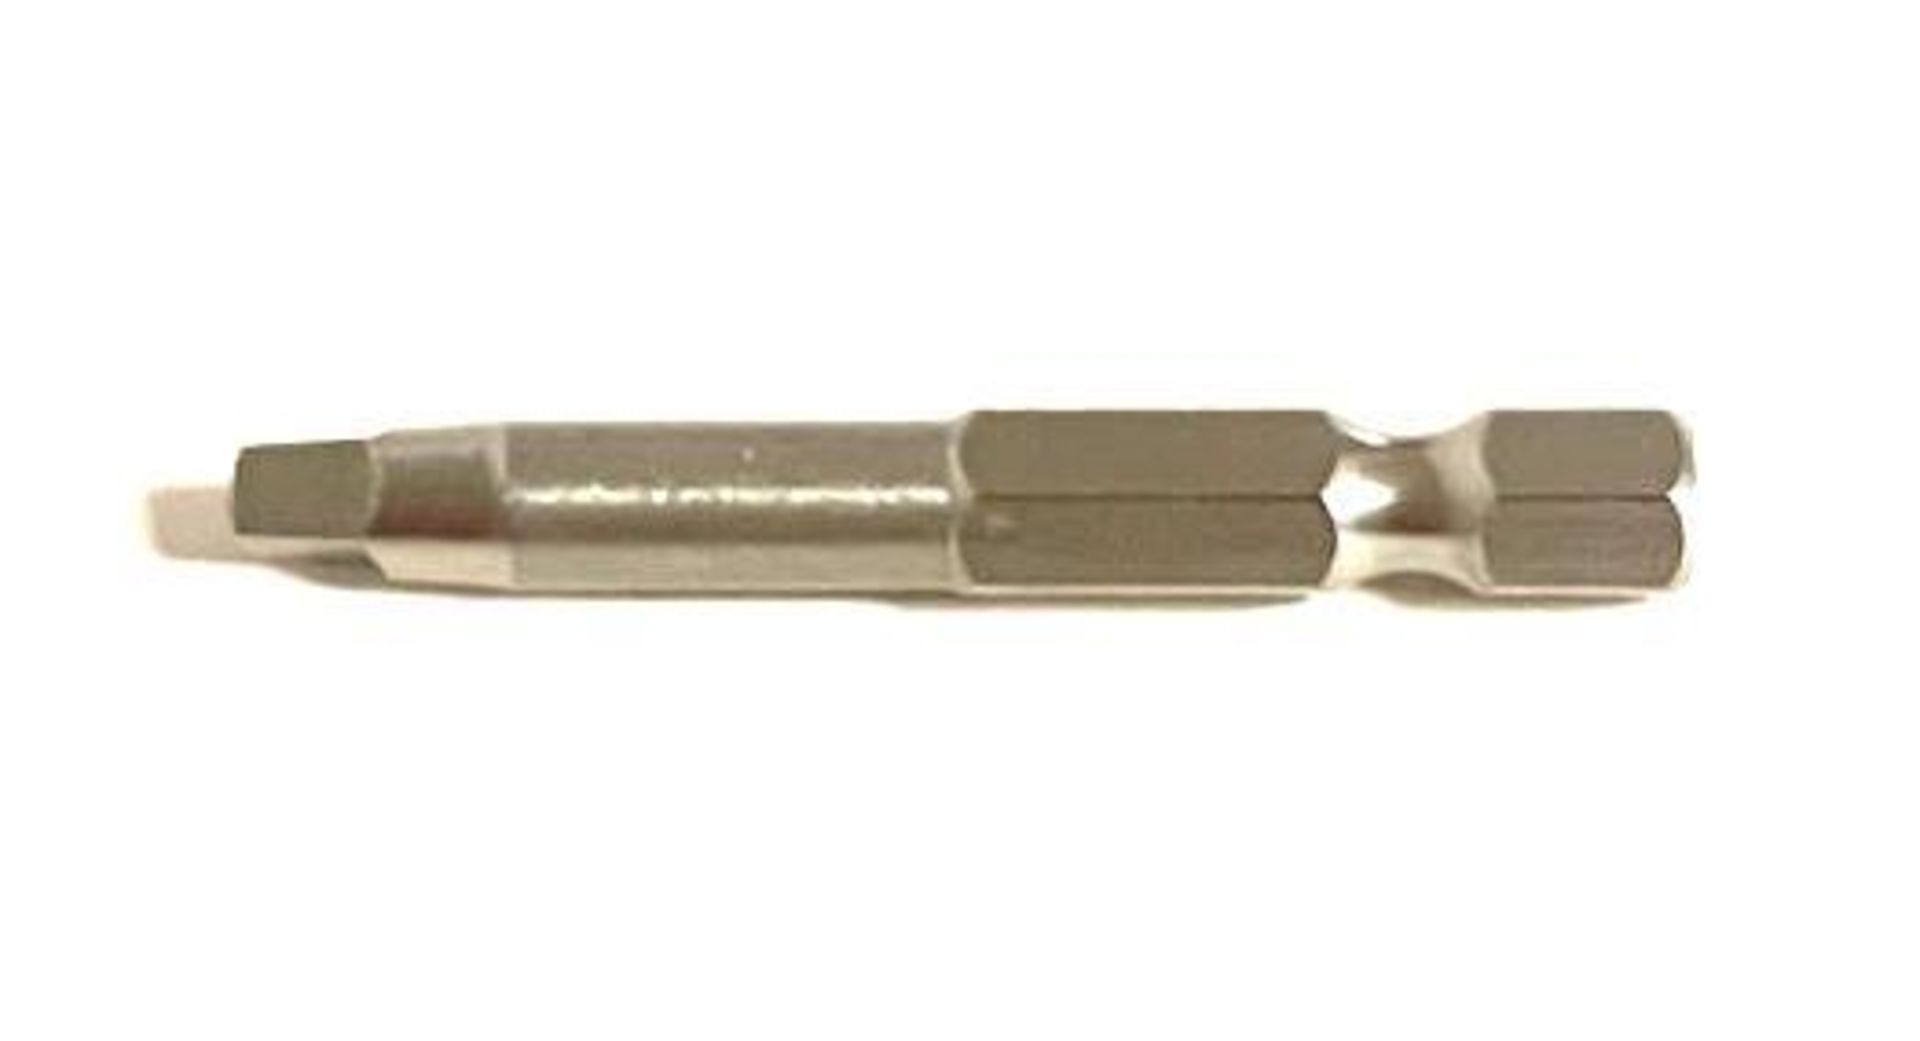 4000CT 2" R3 SQUARE RECESS 1/4" HEX POWER BITS BRAND/MODEL EAZYPOWER 32102 ADDITIONAL INFO TOTAL LOT